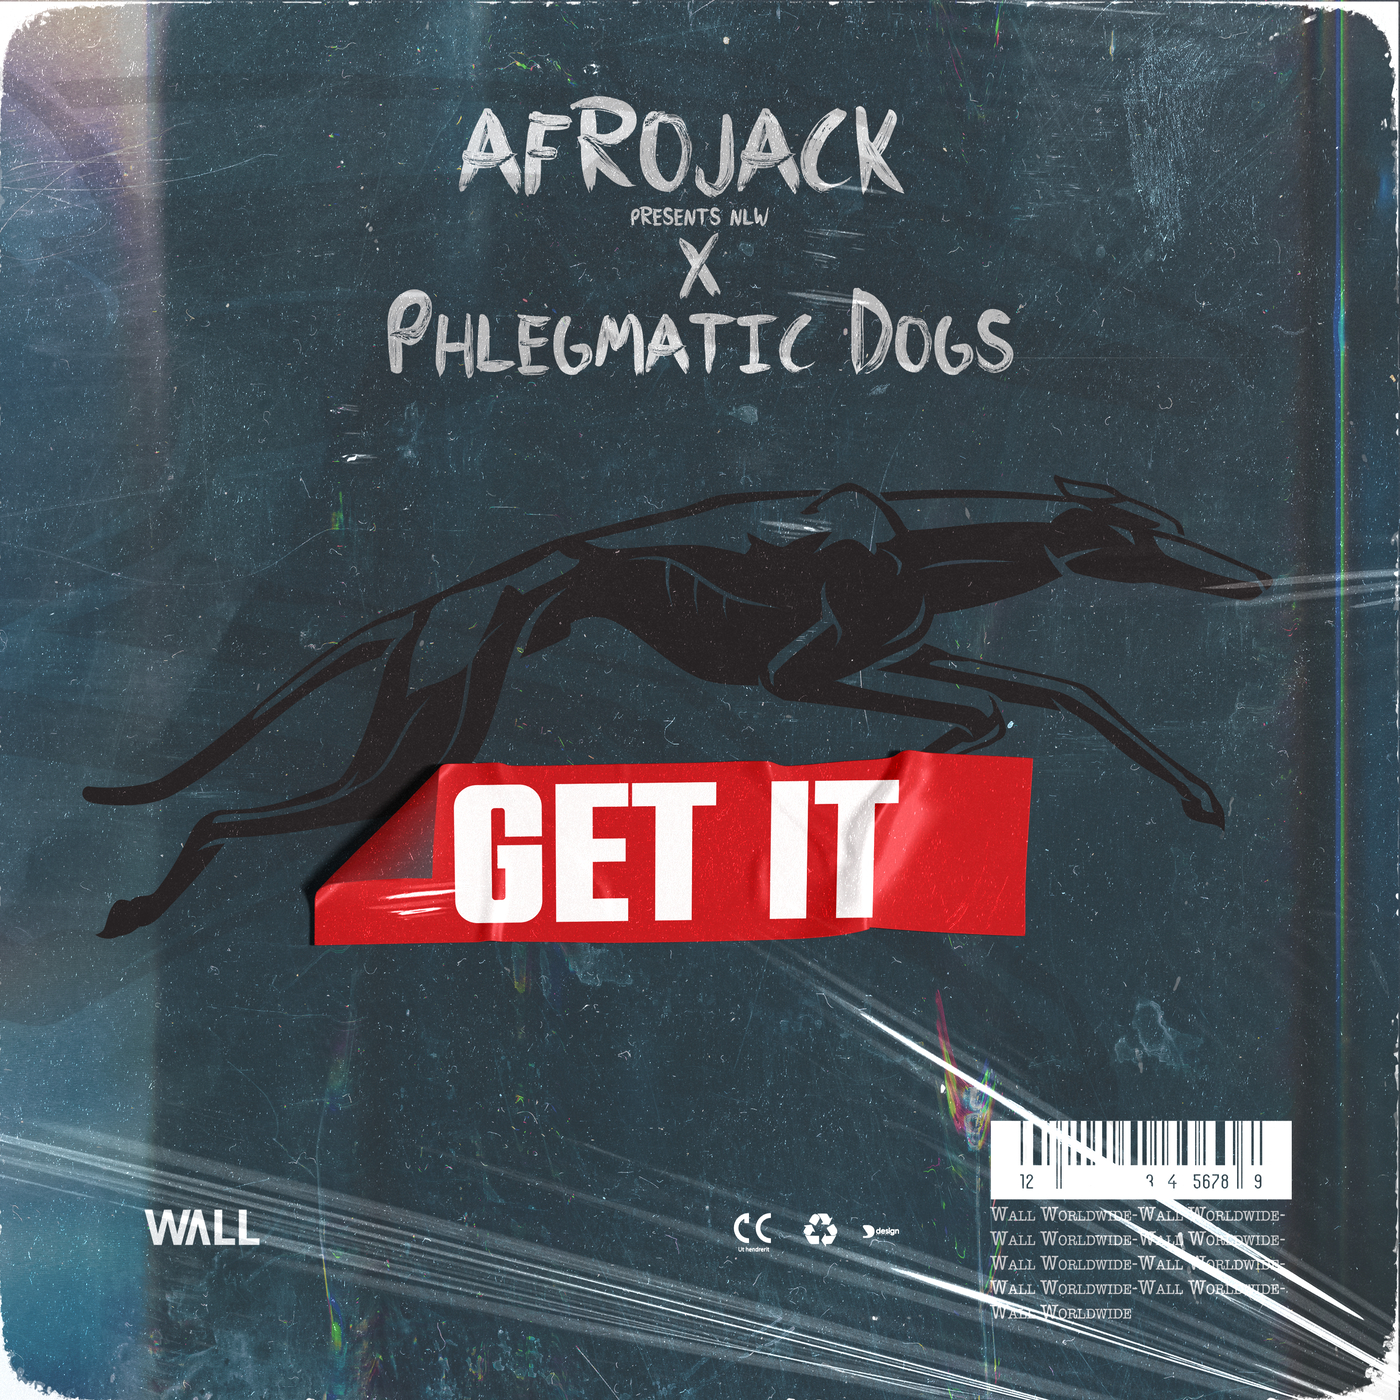 Afrojack presents NLW, Phlegmatic Dogs - Get It